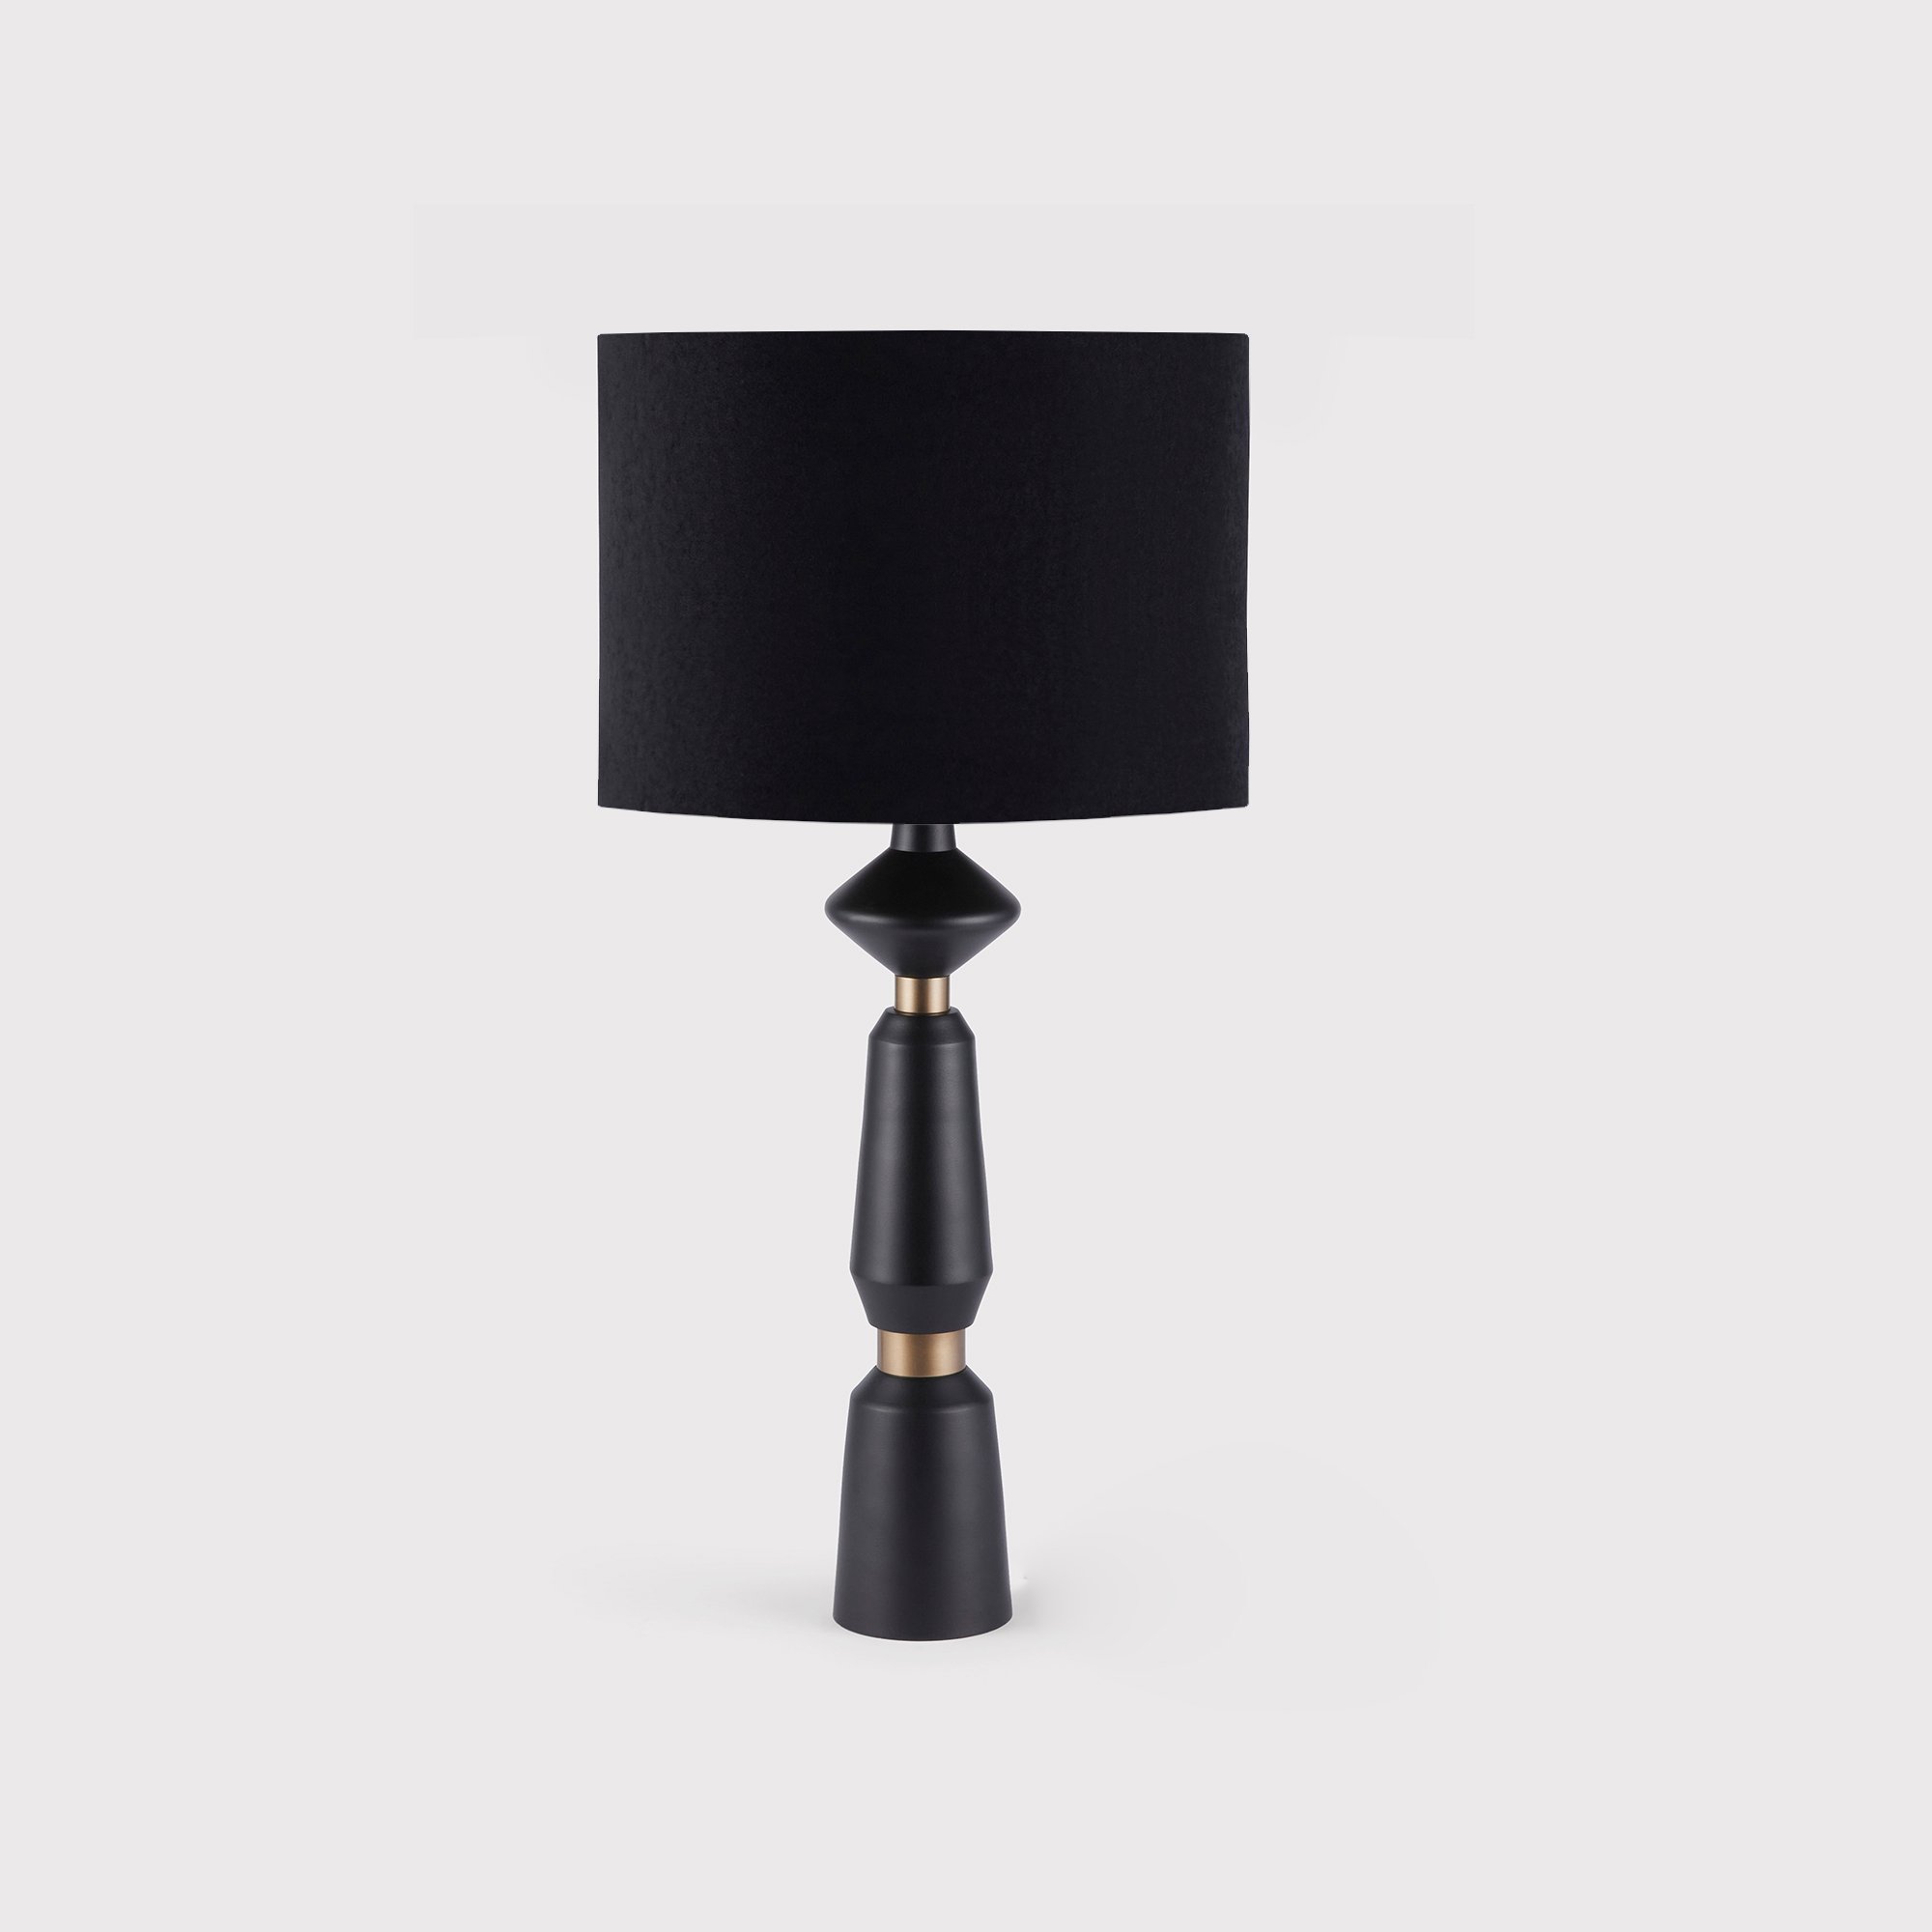 Shaped Black Table Lamp, Round Metal | Barker & Stonehouse